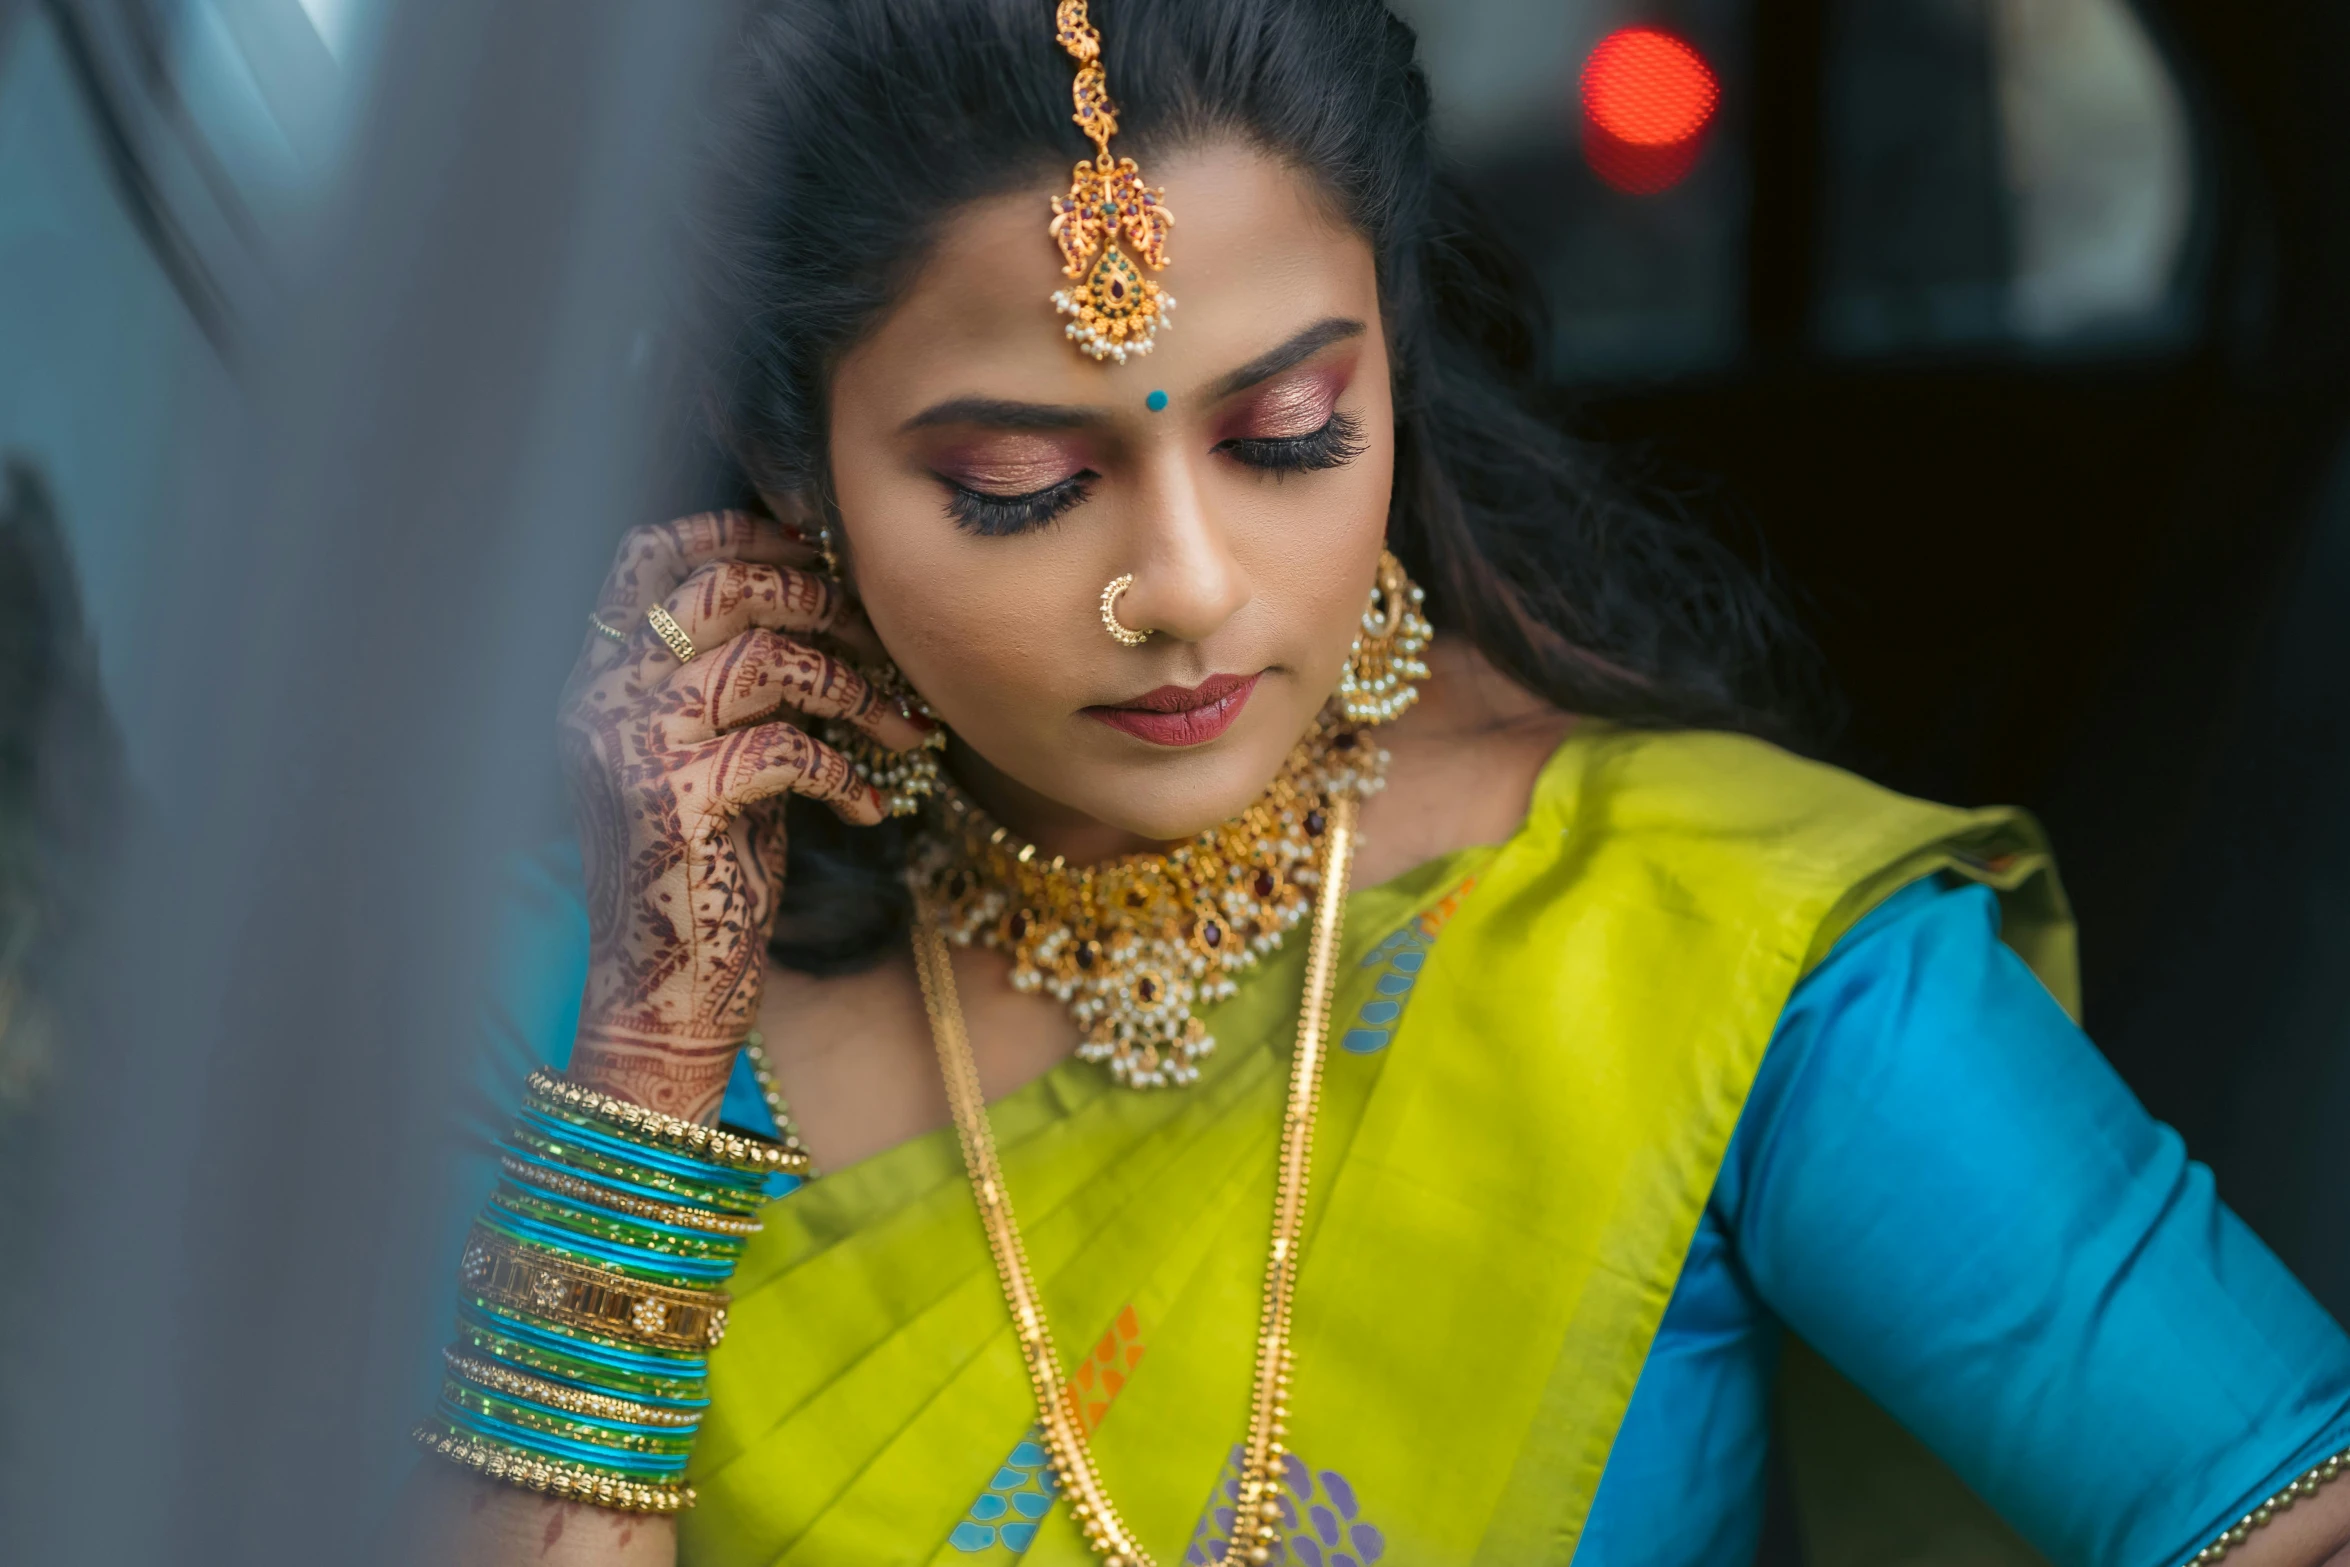 a woman wearing gold jewellery on her neck and hand